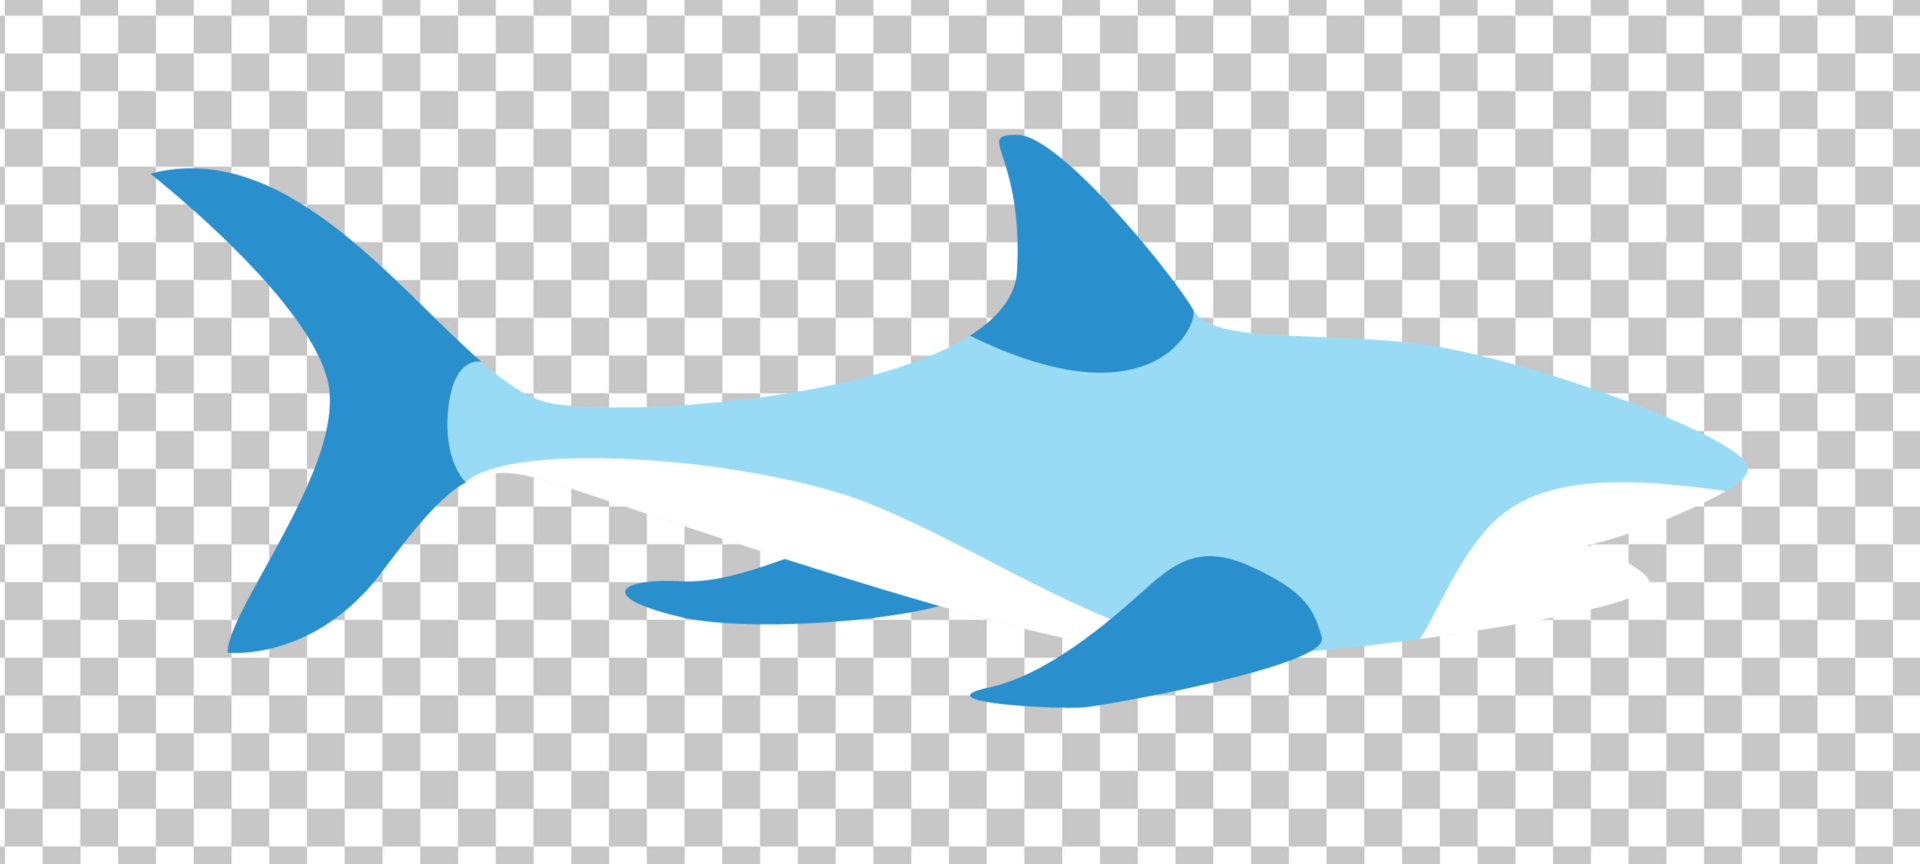 A vector image of a blue shark swimming in the ocean.